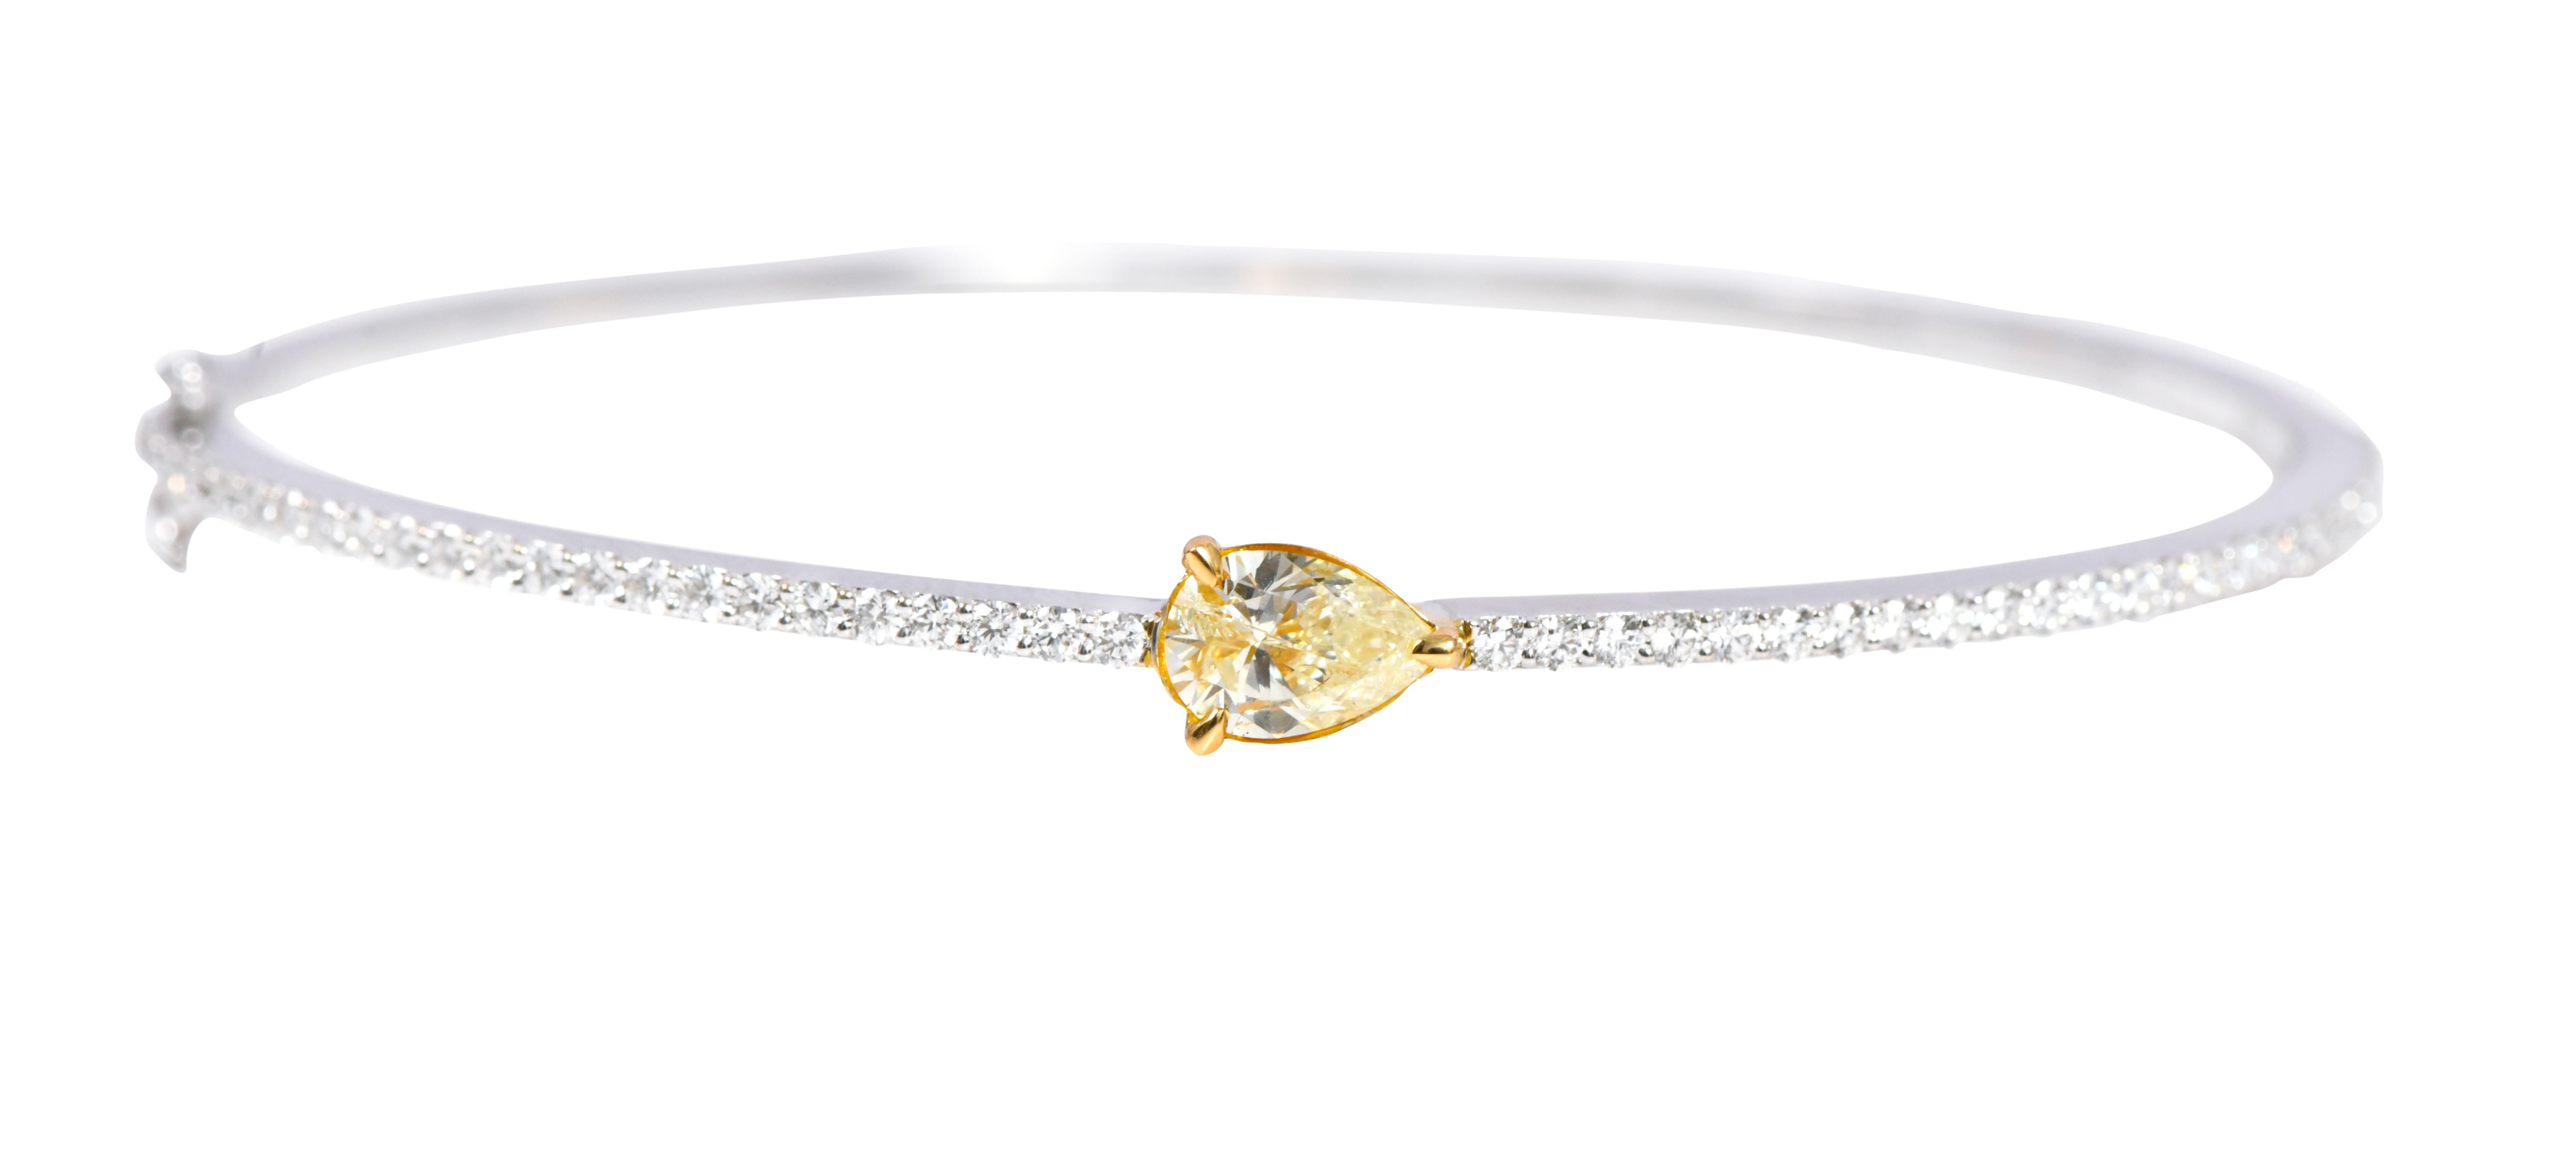 18 Kara Gold 1.44 Carat Solitaire Yellow Diamond and White Diamond Tennis Bangle

Get ready to answer a lot of questions and bag amazing compliments as it’s your time to sparkle now. The ensembles we carry speaks a lot about our style but the pieces